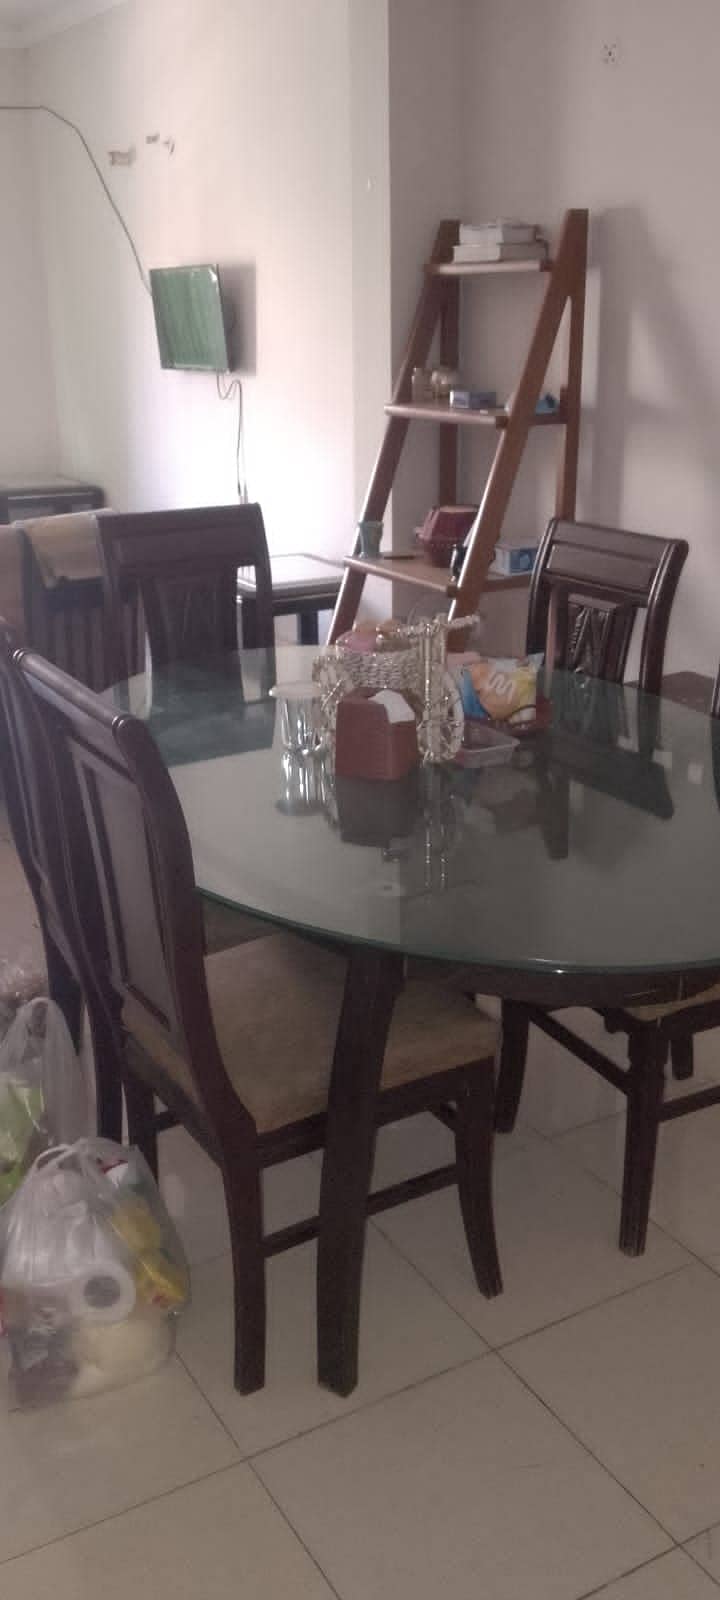 Dining table with 5 chairs  03218848082 0